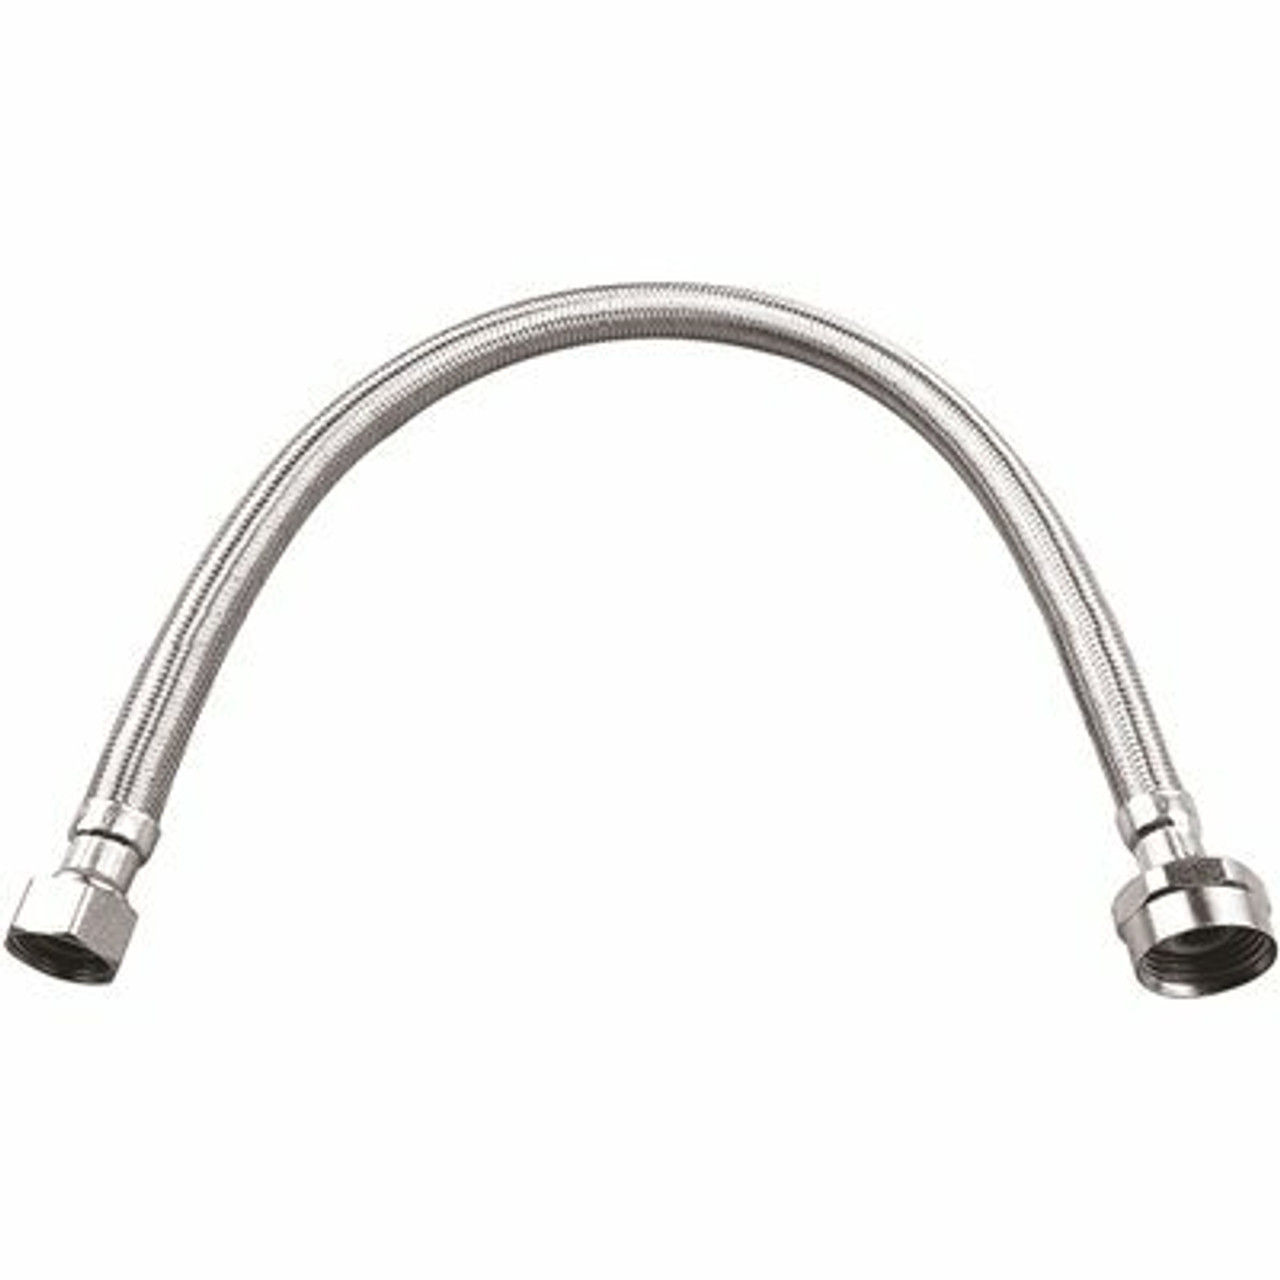 Durapro 1/2 In. Fip X 7/8 In. Metal Ballcock X 12 In. Braided Stainless Steel Toilet Connector